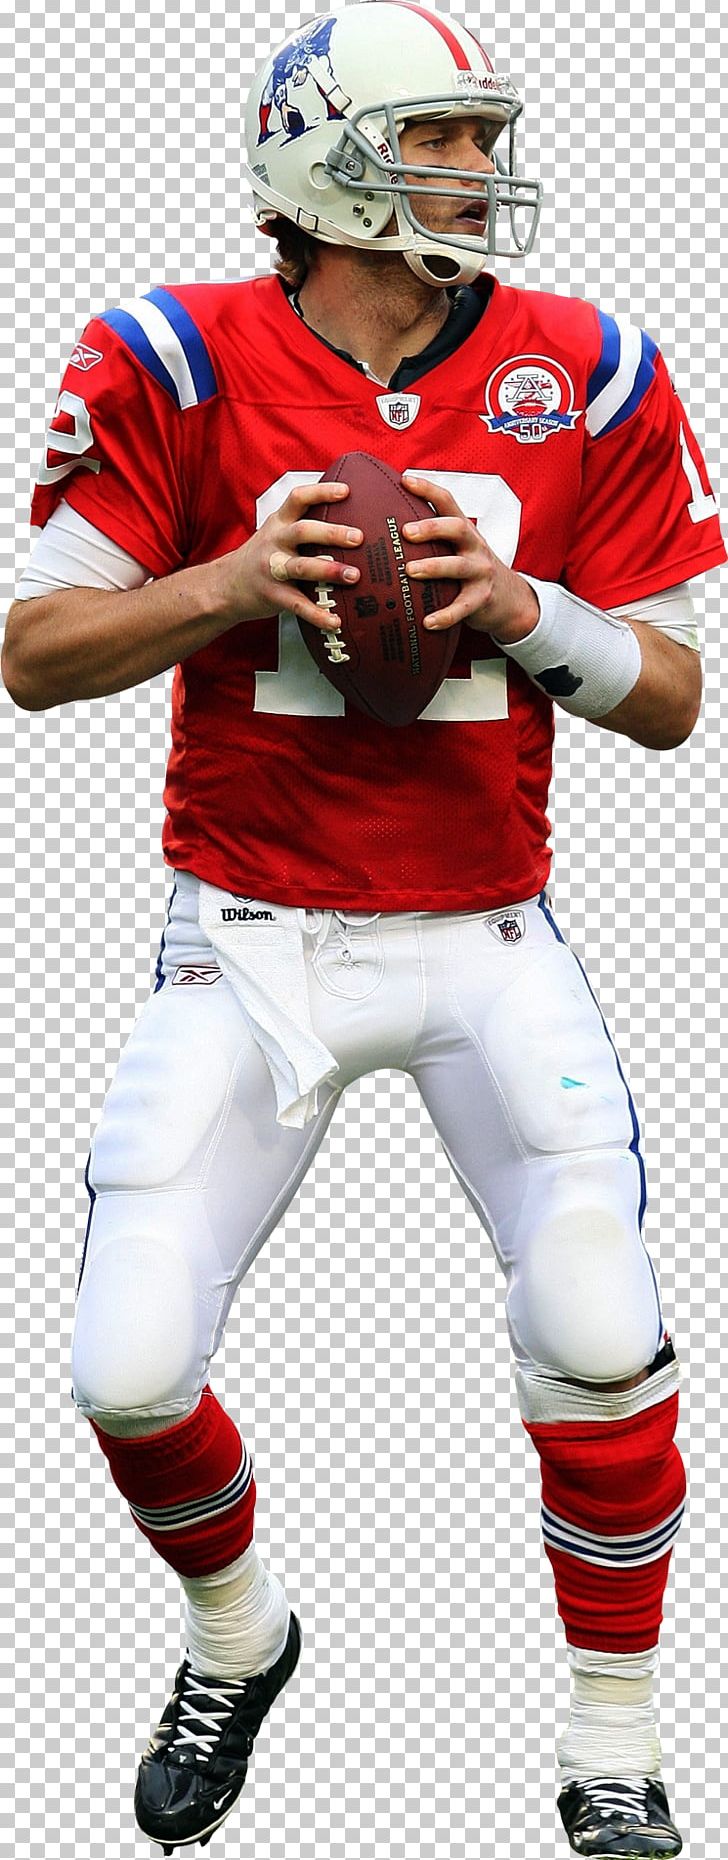 American Football Protective Gear Protective Gear In Sports Team Sport PNG, Clipart, Baseball Glove, Competition Event, Football Player, Jersey, New England Patriots Free PNG Download